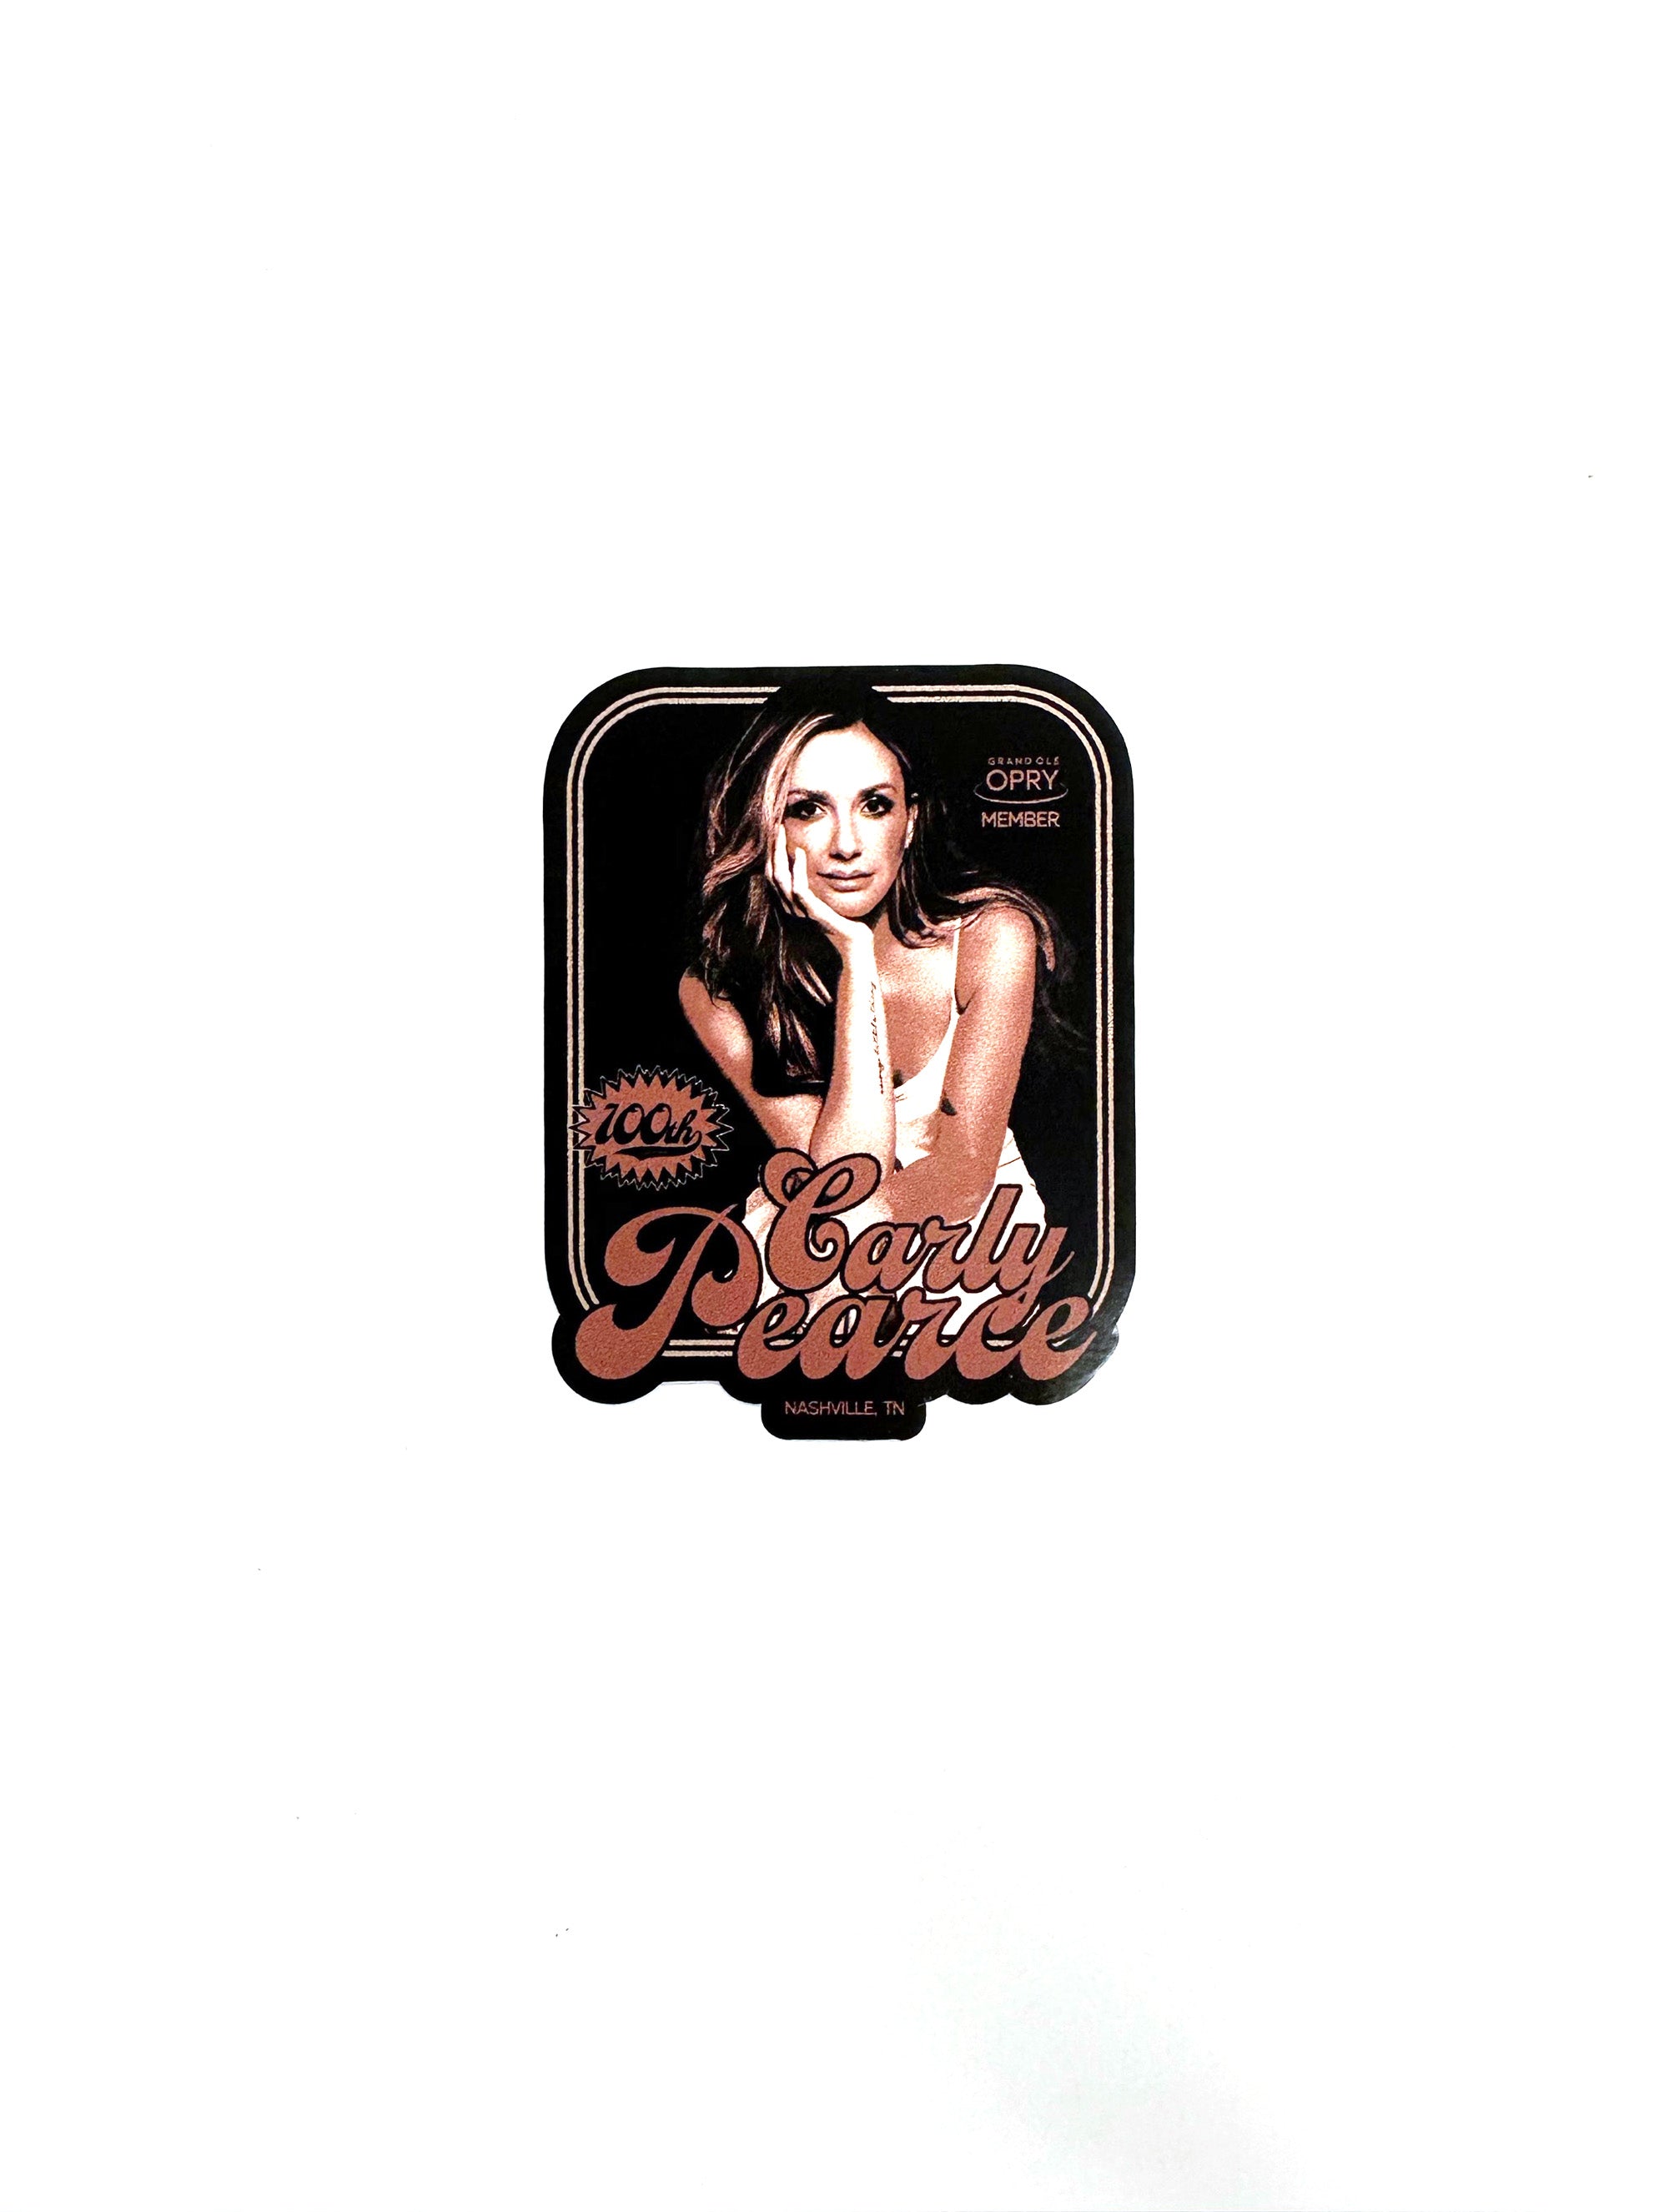 Carly Pearce Opry Exclusive 4 Piece Sticker Pack